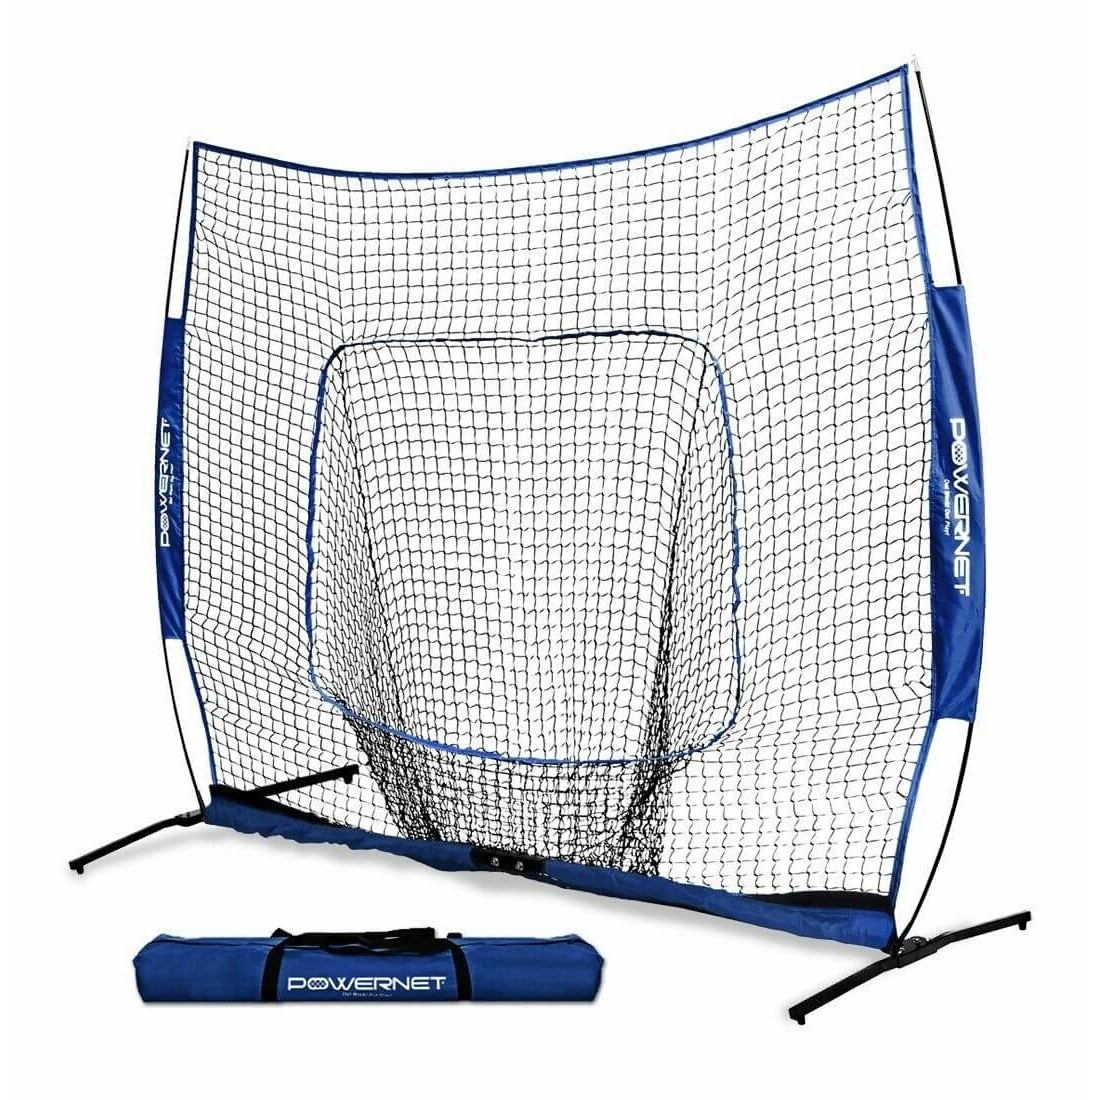 PowerNet 7x7 PRO Portable Pitching Batting Net With One Piece Frame And Carry Bag - Royal Blue